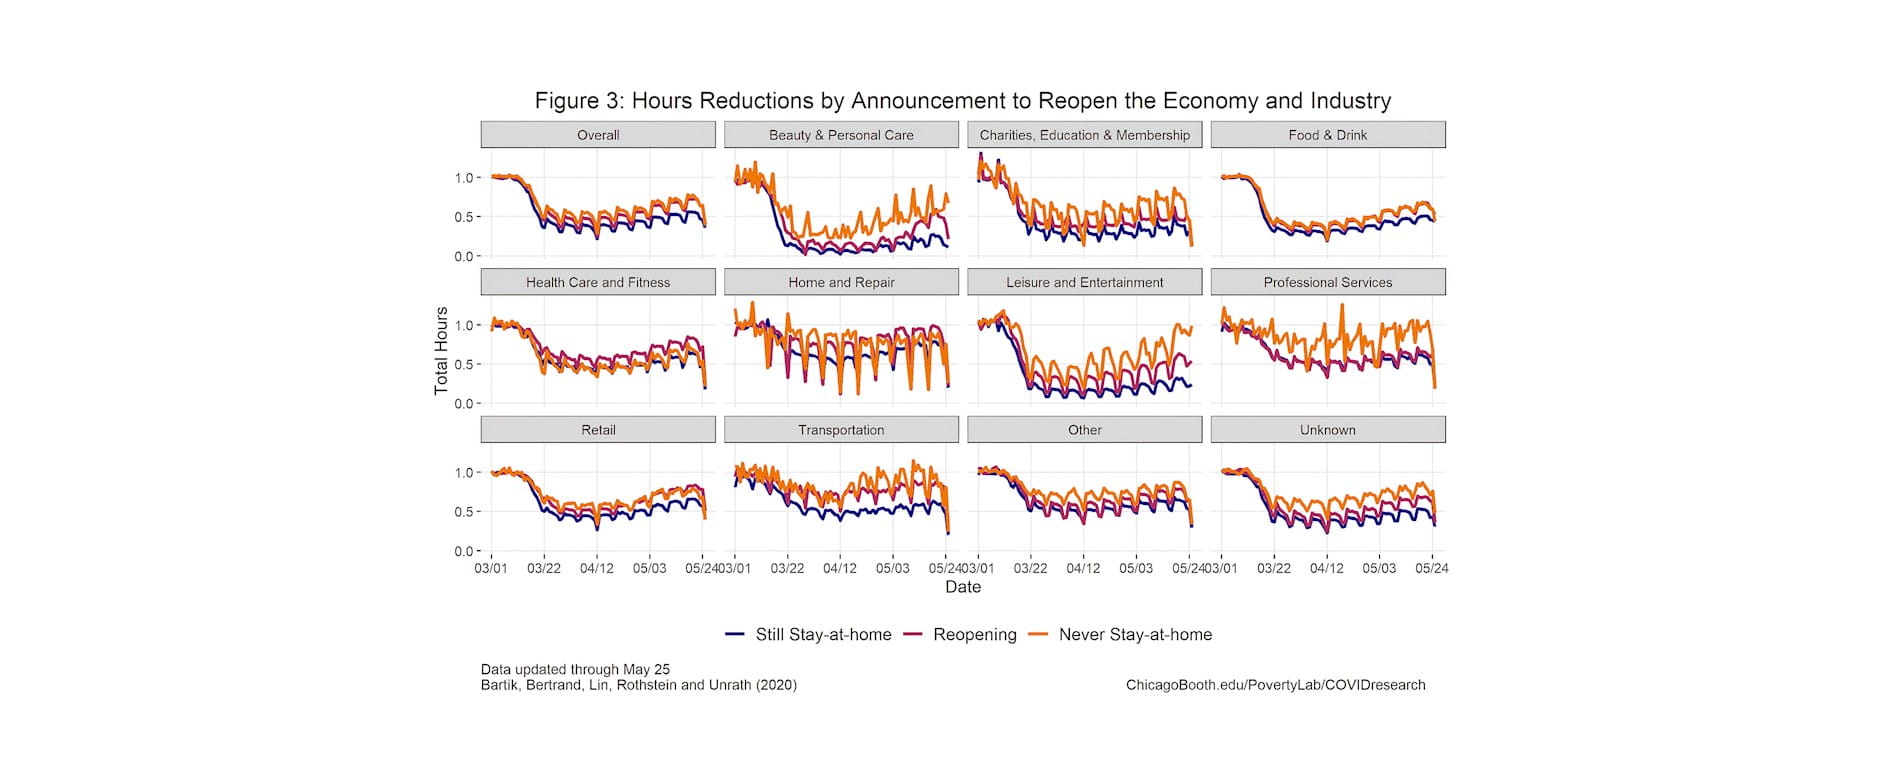 Figure 3: Hours Reductions by Announcement to Reopen the Economy and Industry